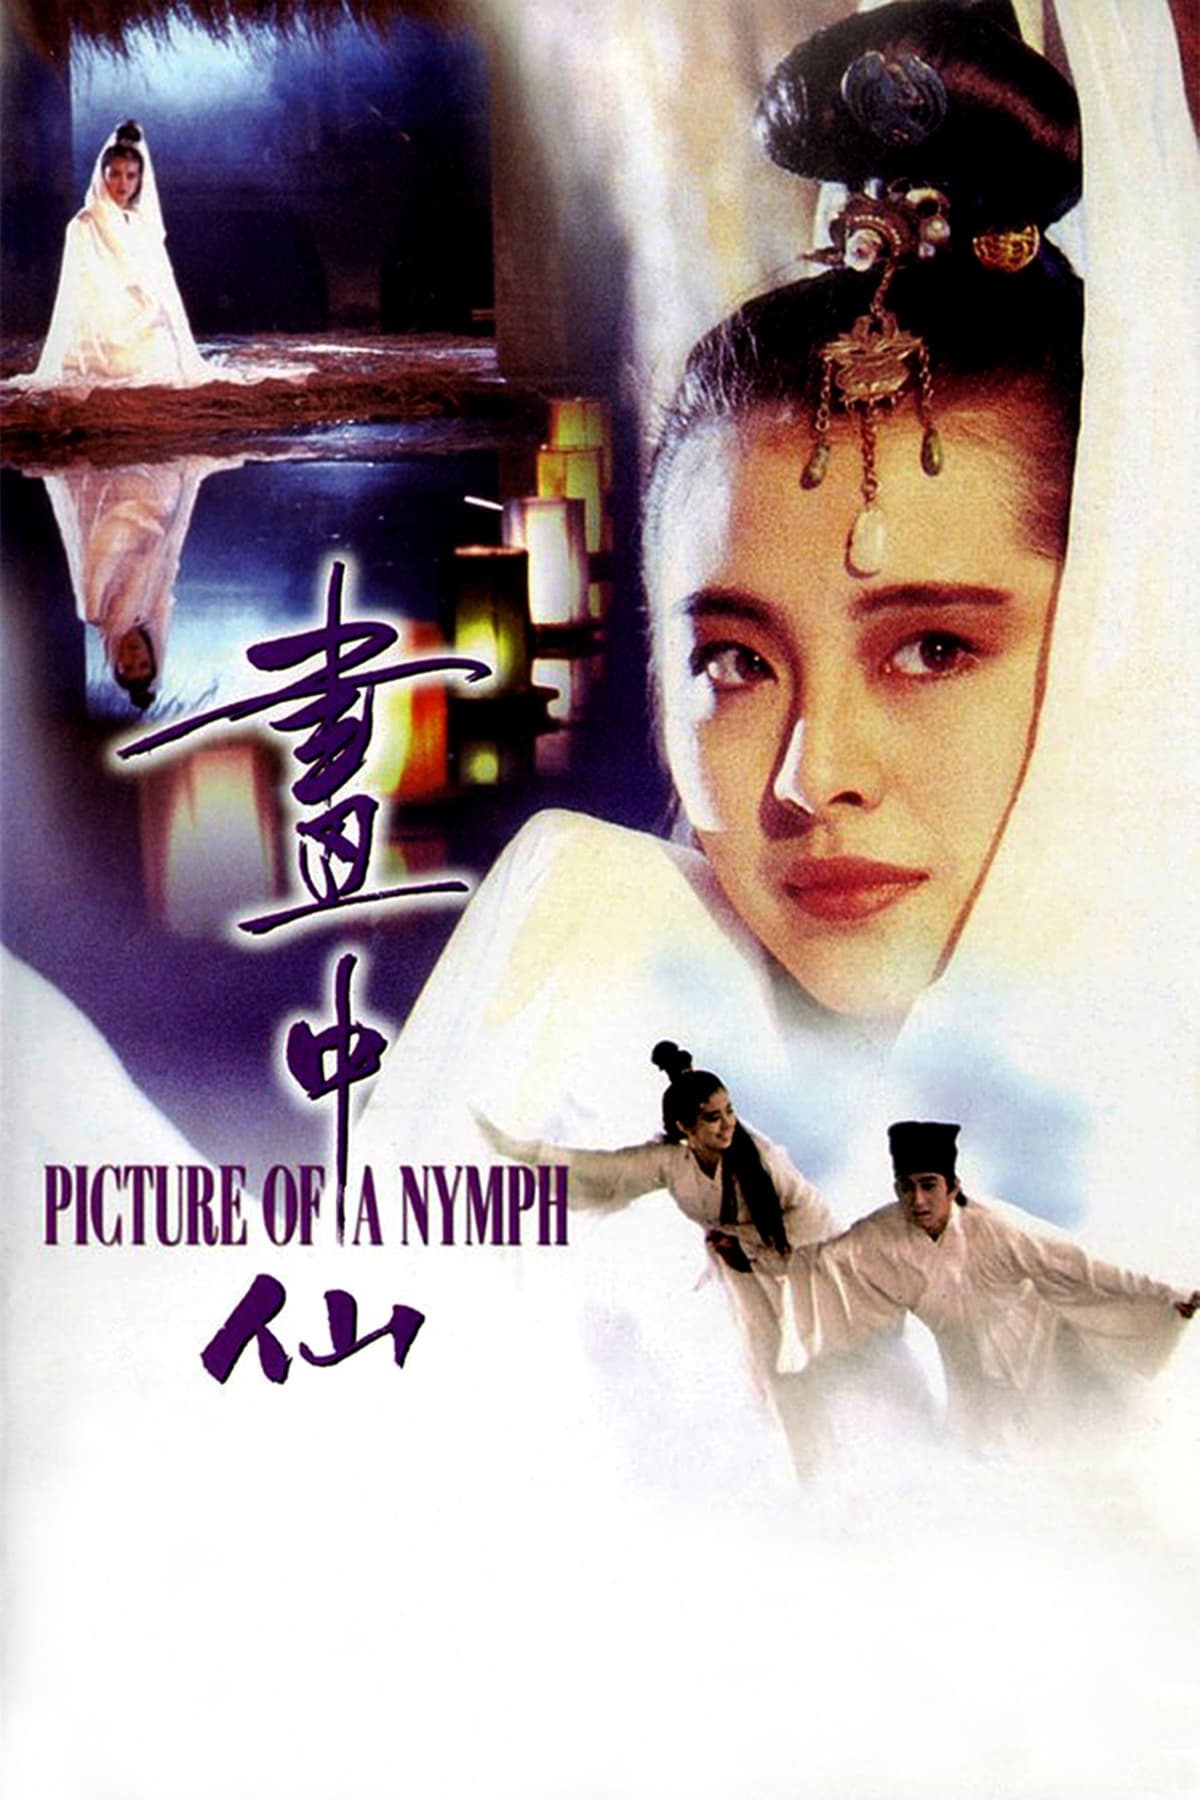 Picture of a Nymph (1988)